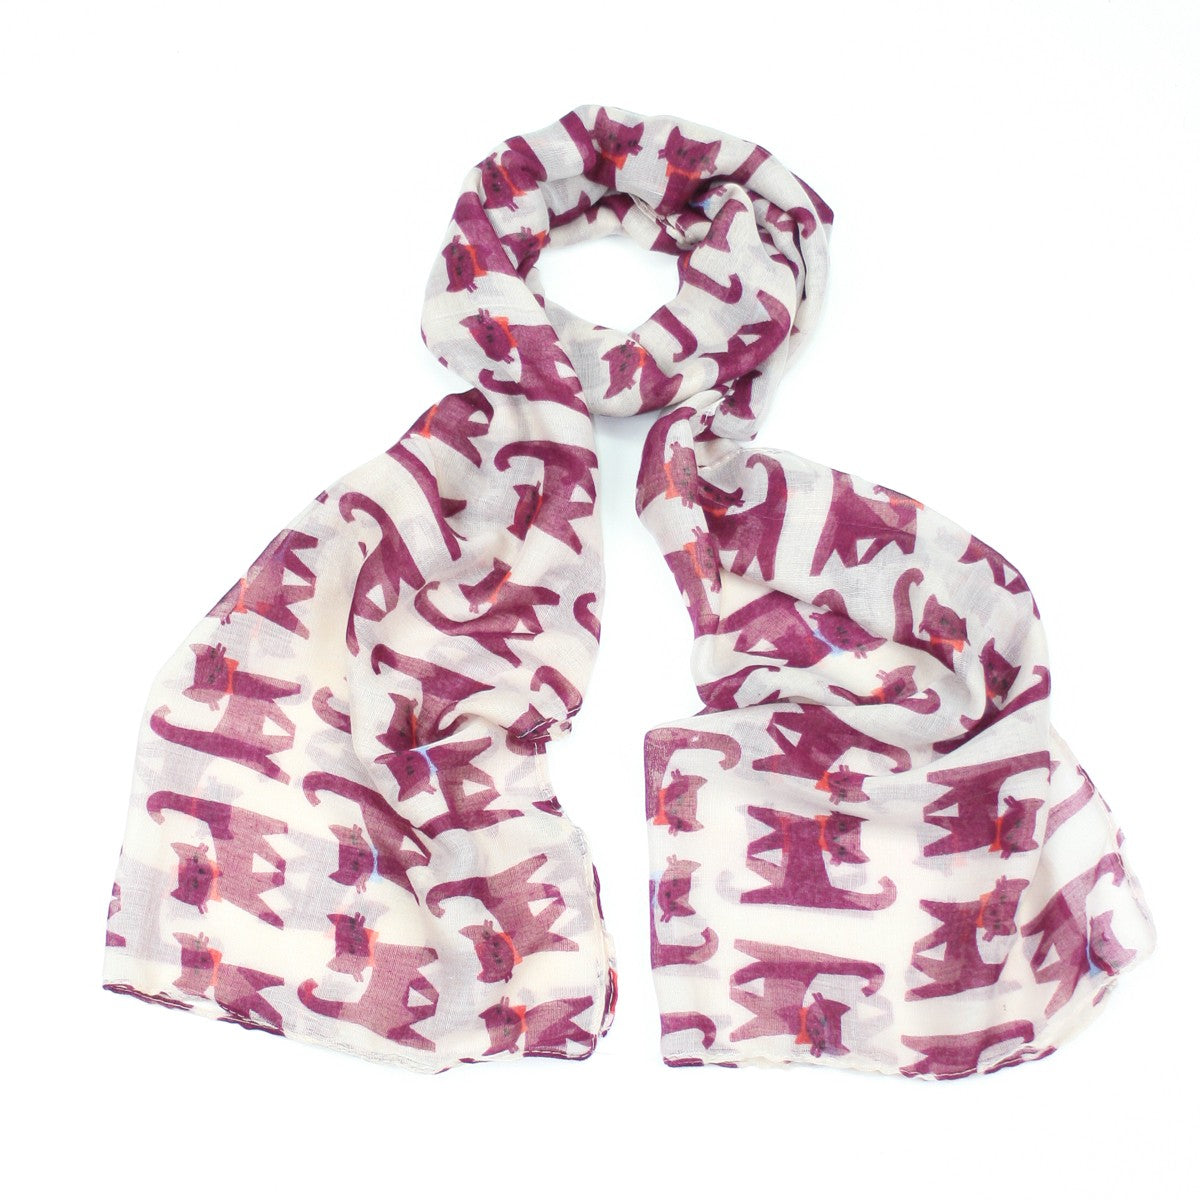 Fun pink cat design on a white background printed scarf